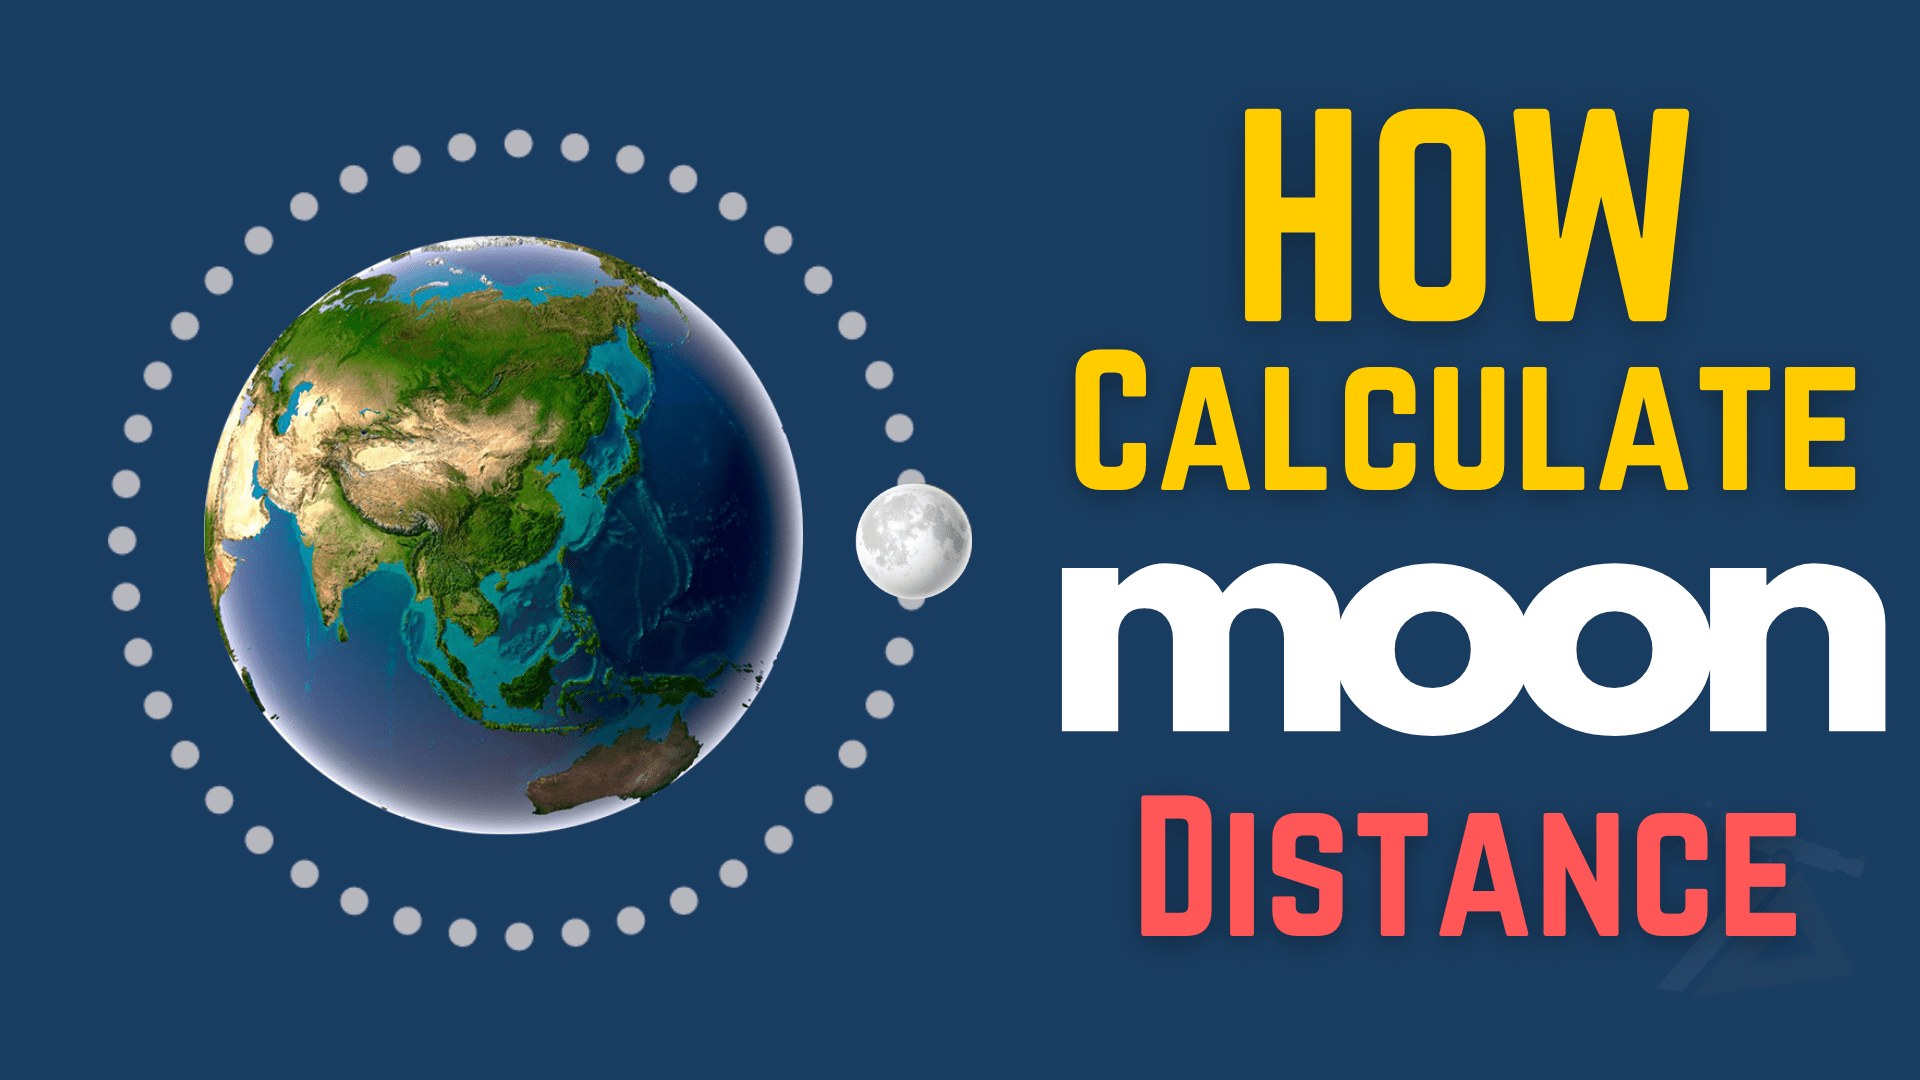 How to calculate the distance the Moon.